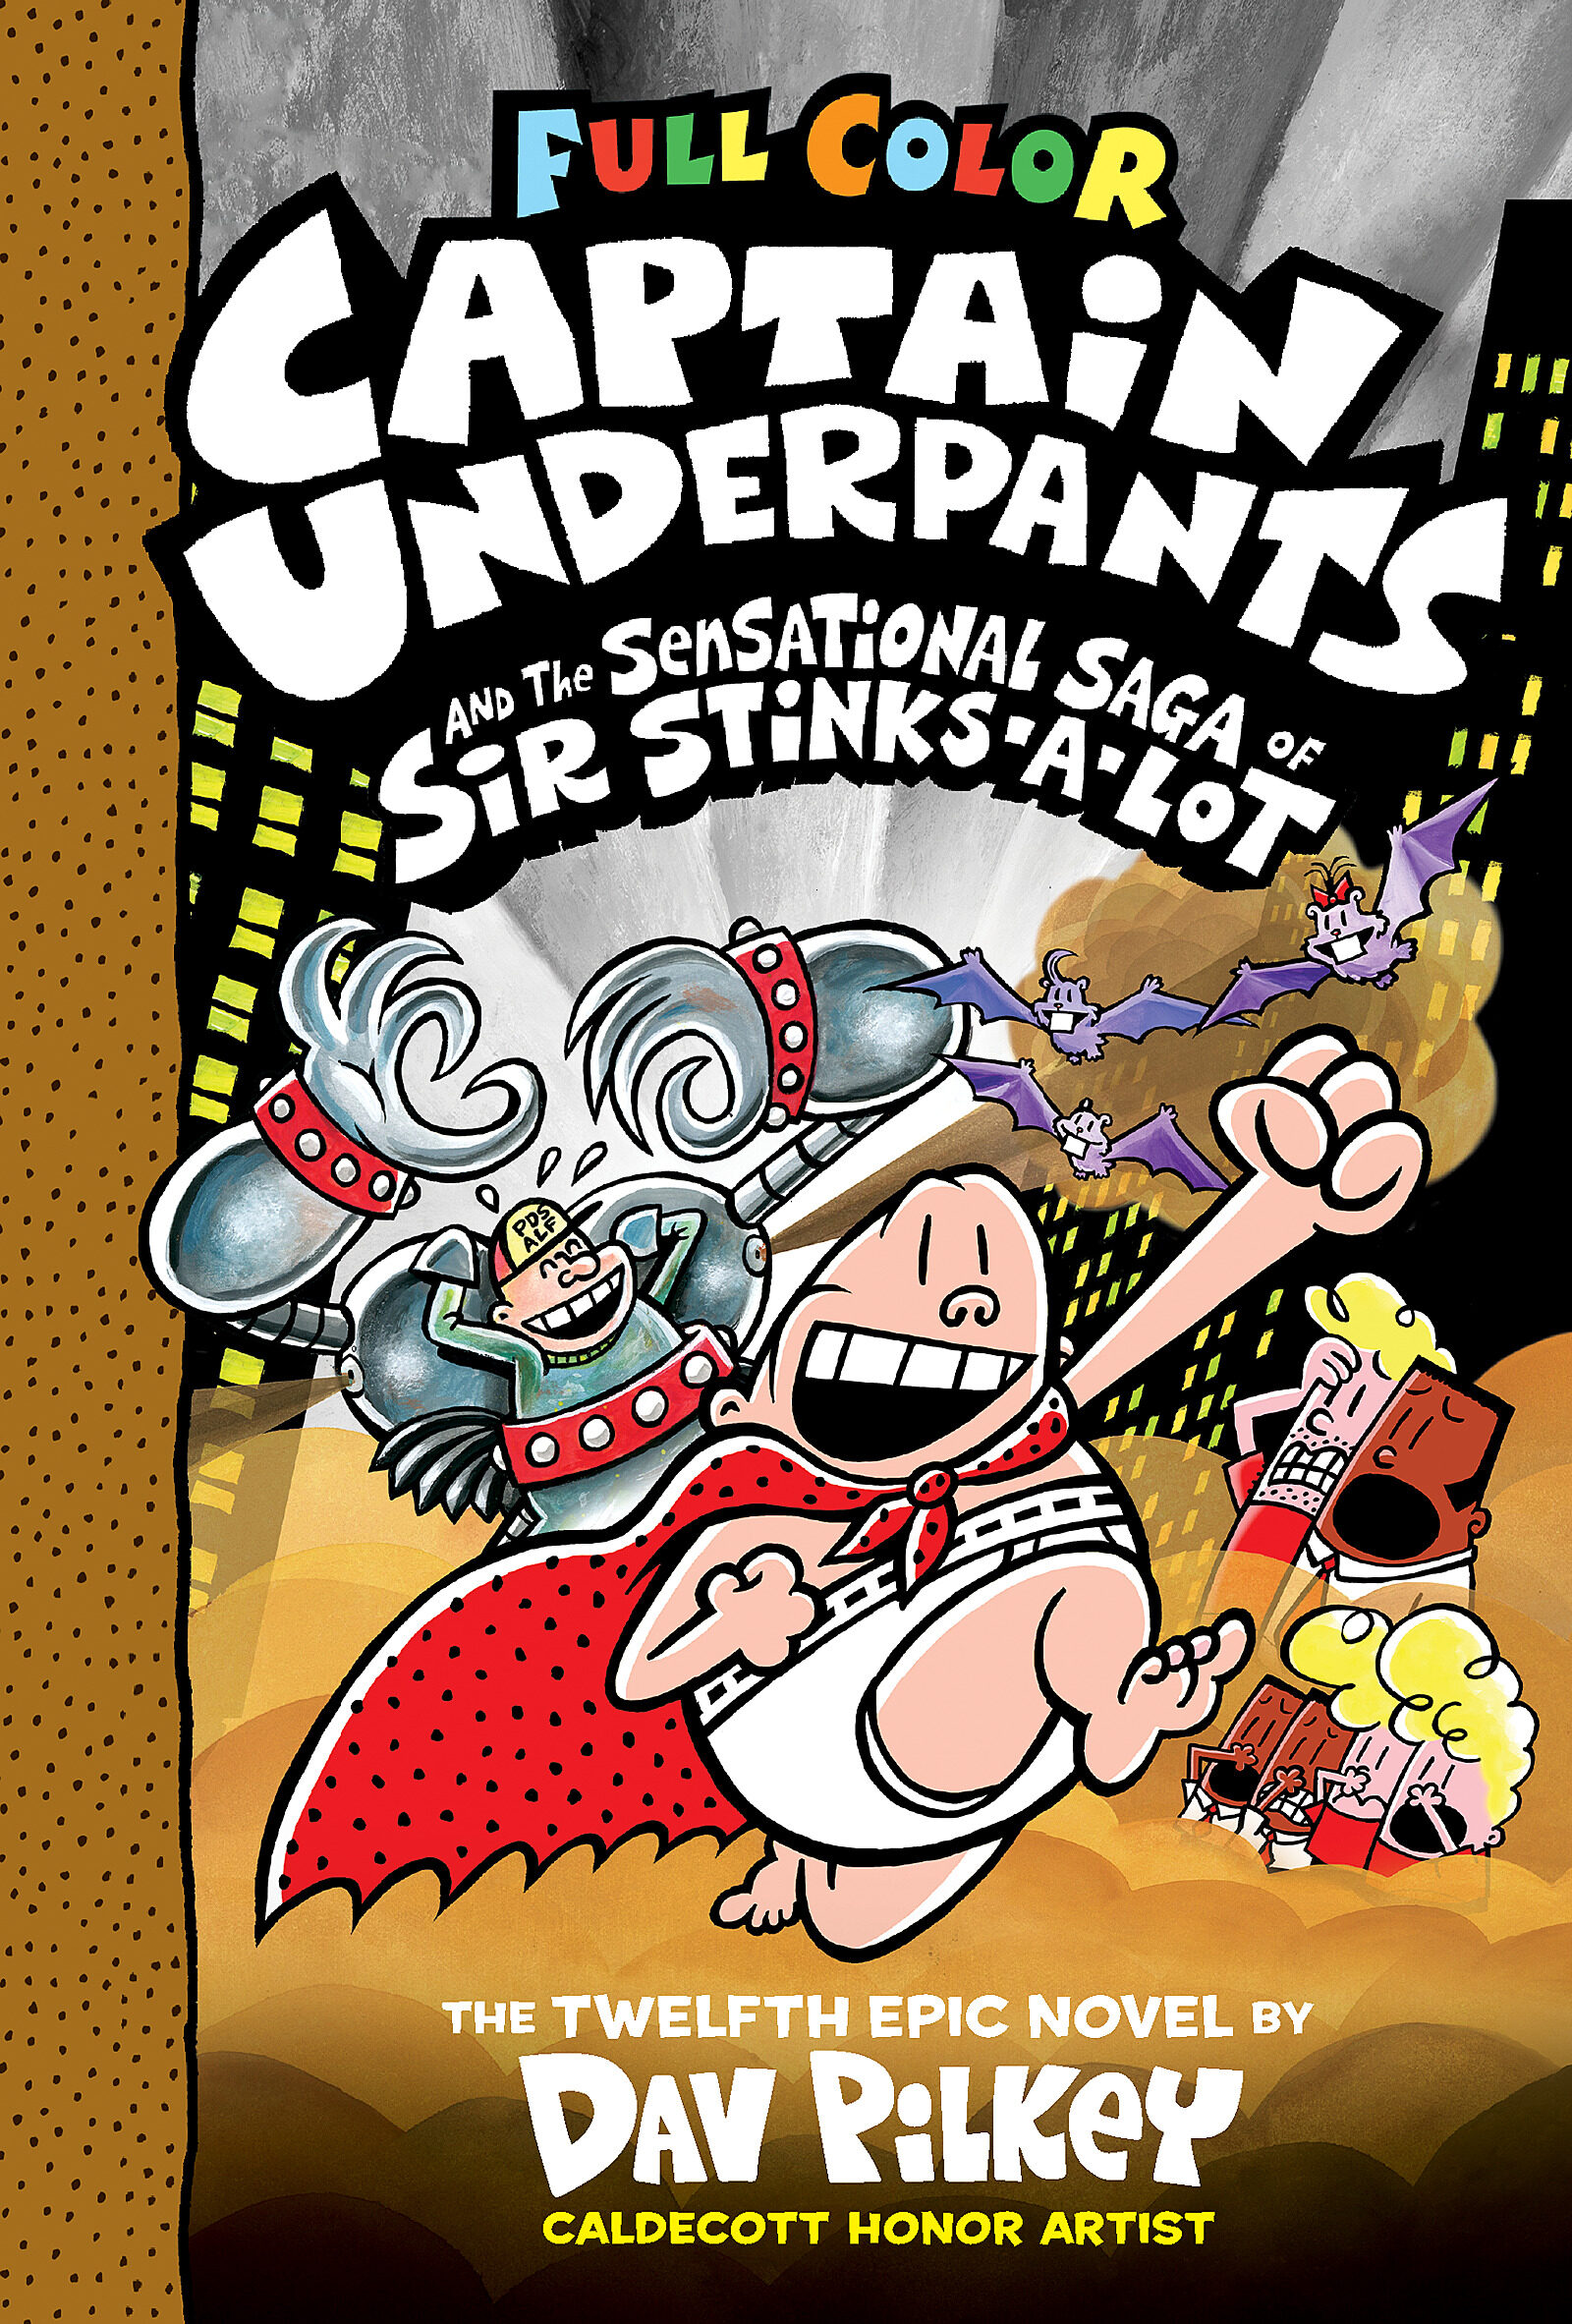 Captain Underpants and the Sensational Saga of Sir Stinks-A-Lot: Color Edition (Captain Underpants #12) cover image